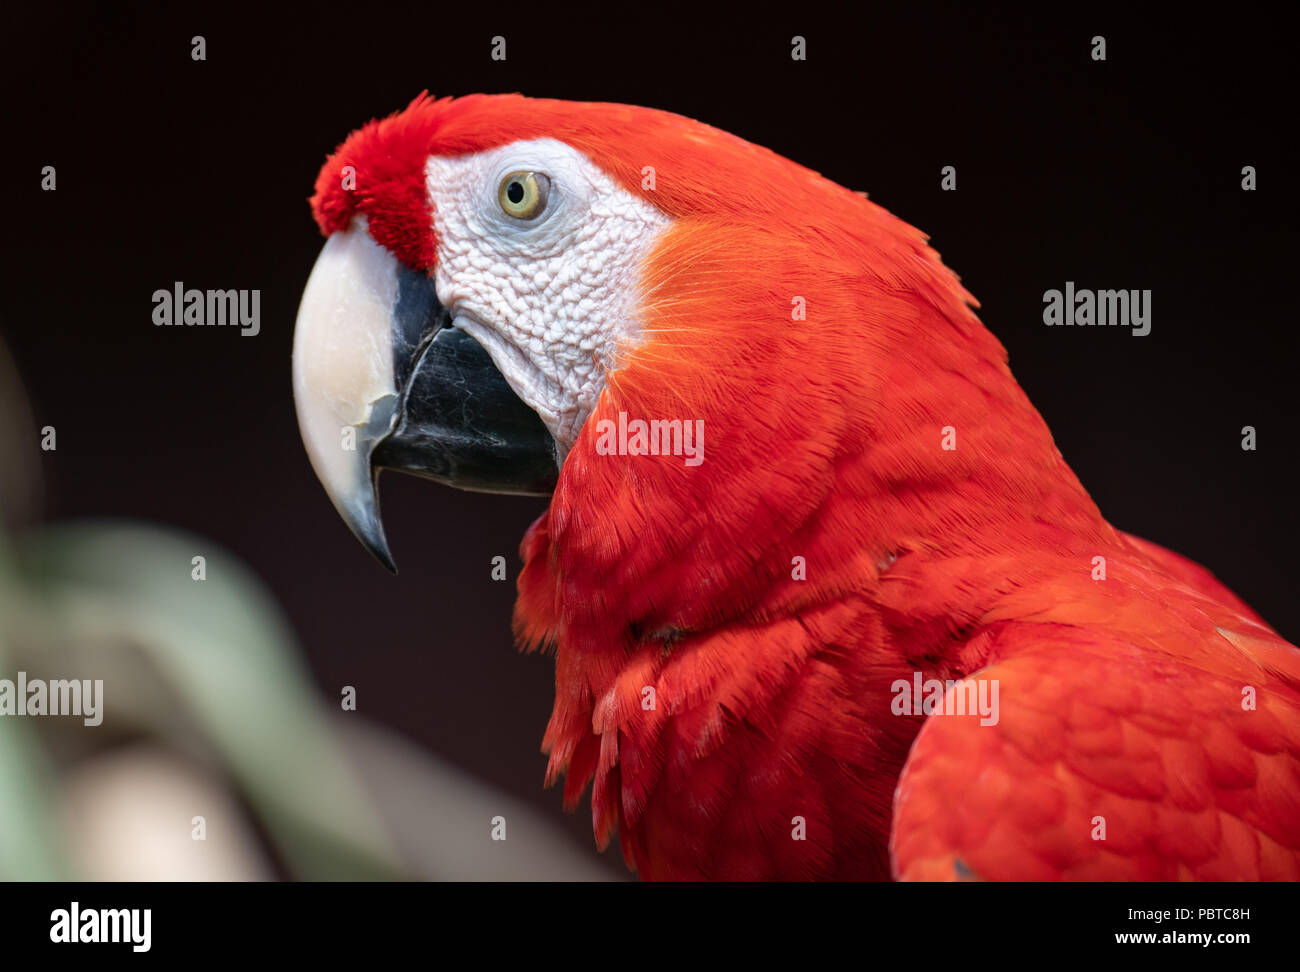 Macaw Parrot Stock Photo